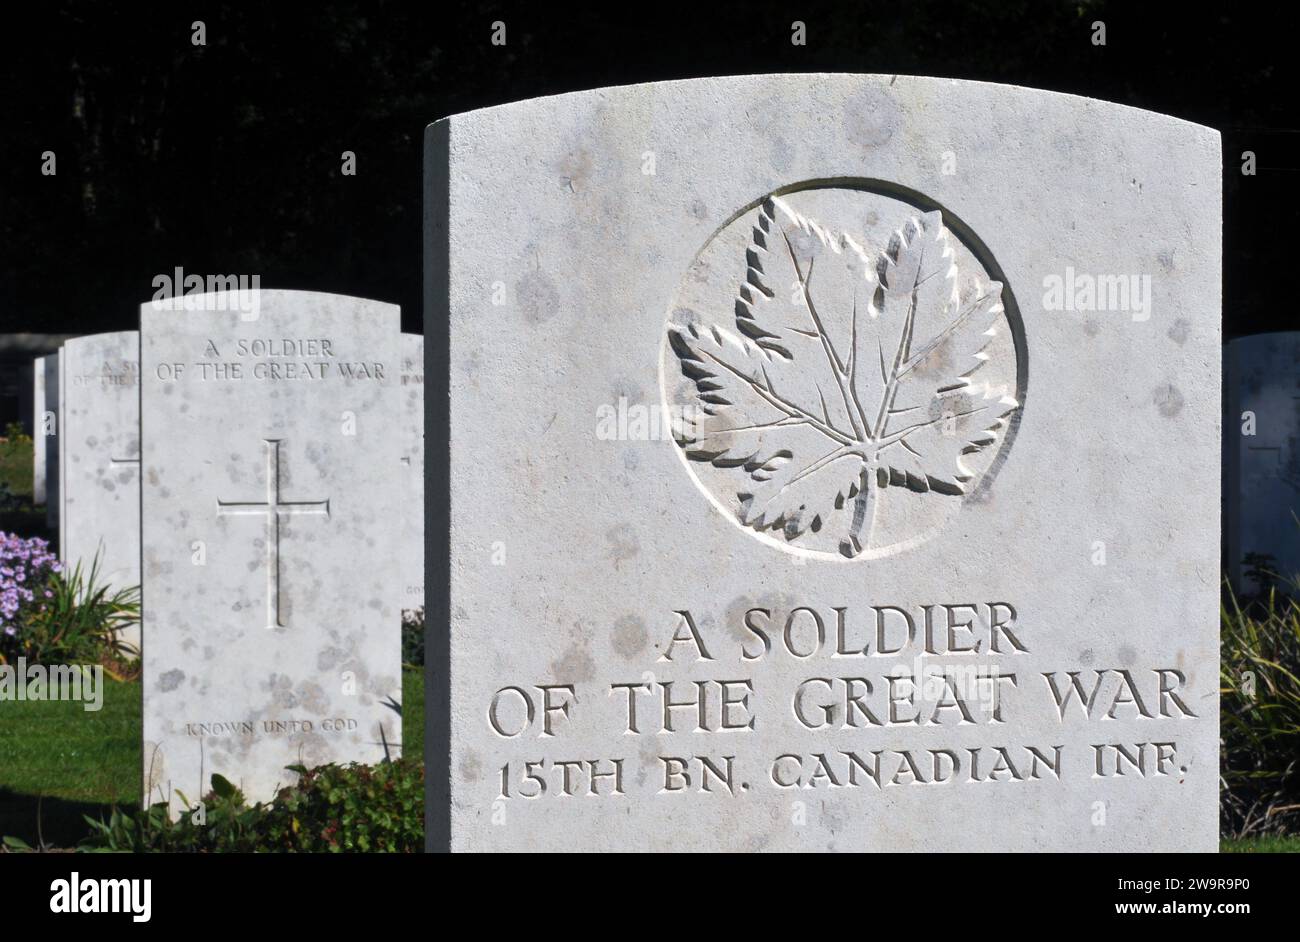 Headstones of Commonwealth soldiers killed in the First World War, in Canadian Cemetery No. 2 at the Canadian National Vimy Memorial Park in France. Stock Photo